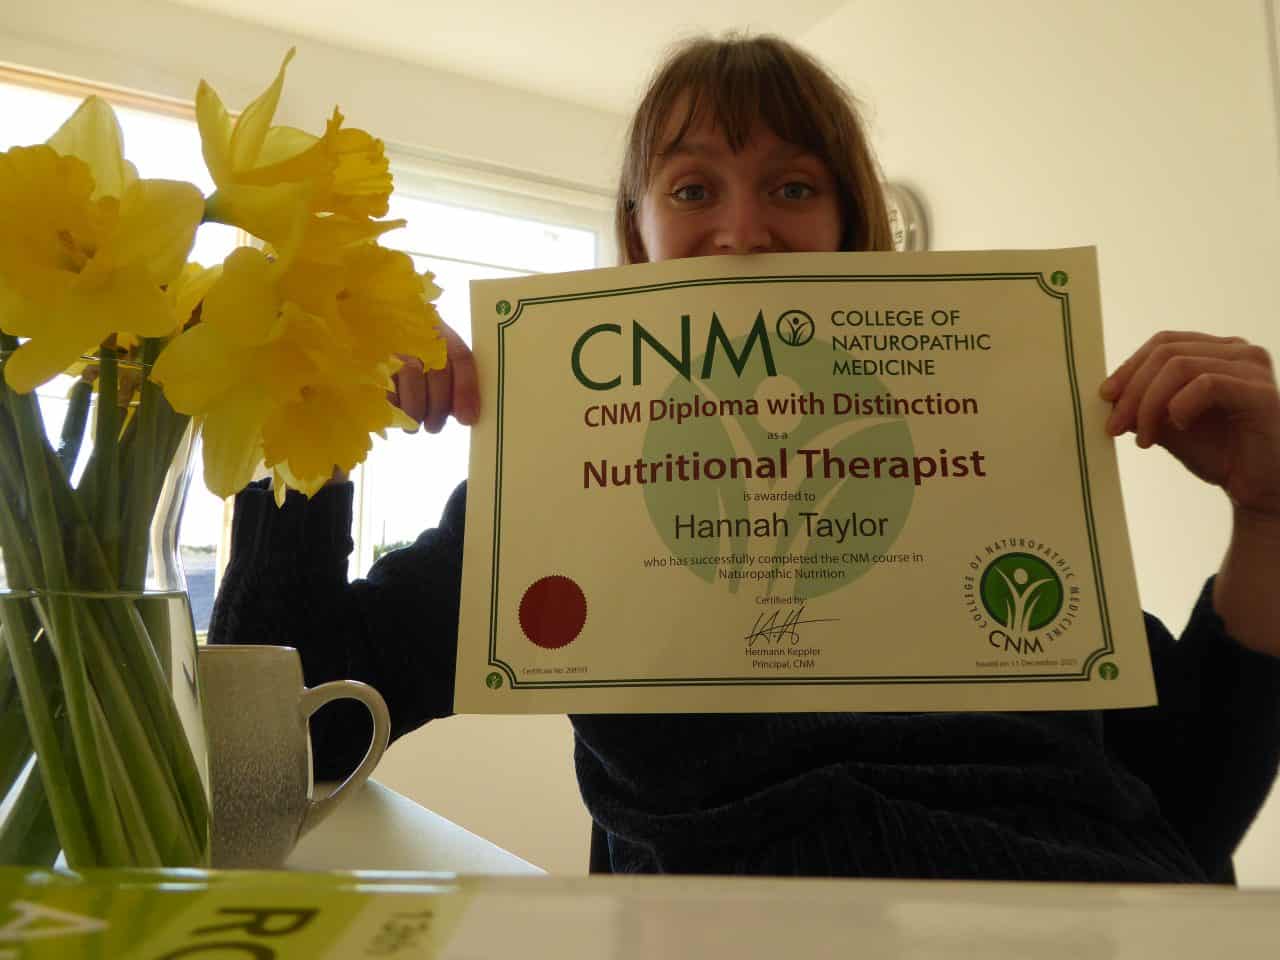 Woman with nutritional therapy qualification college of natural medicine